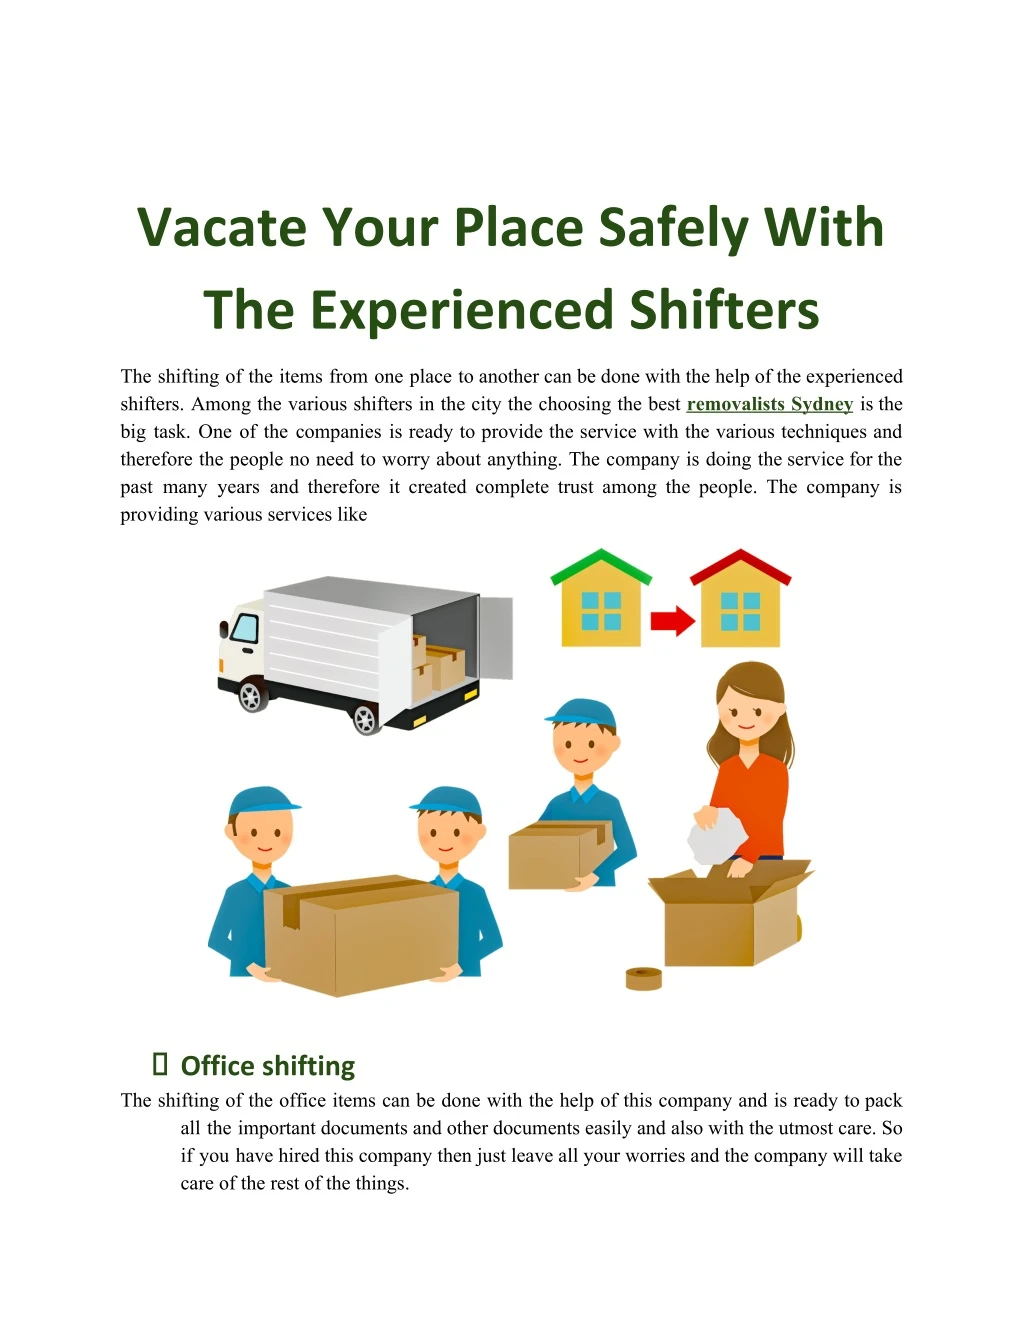 vacate your place safely with the experienced